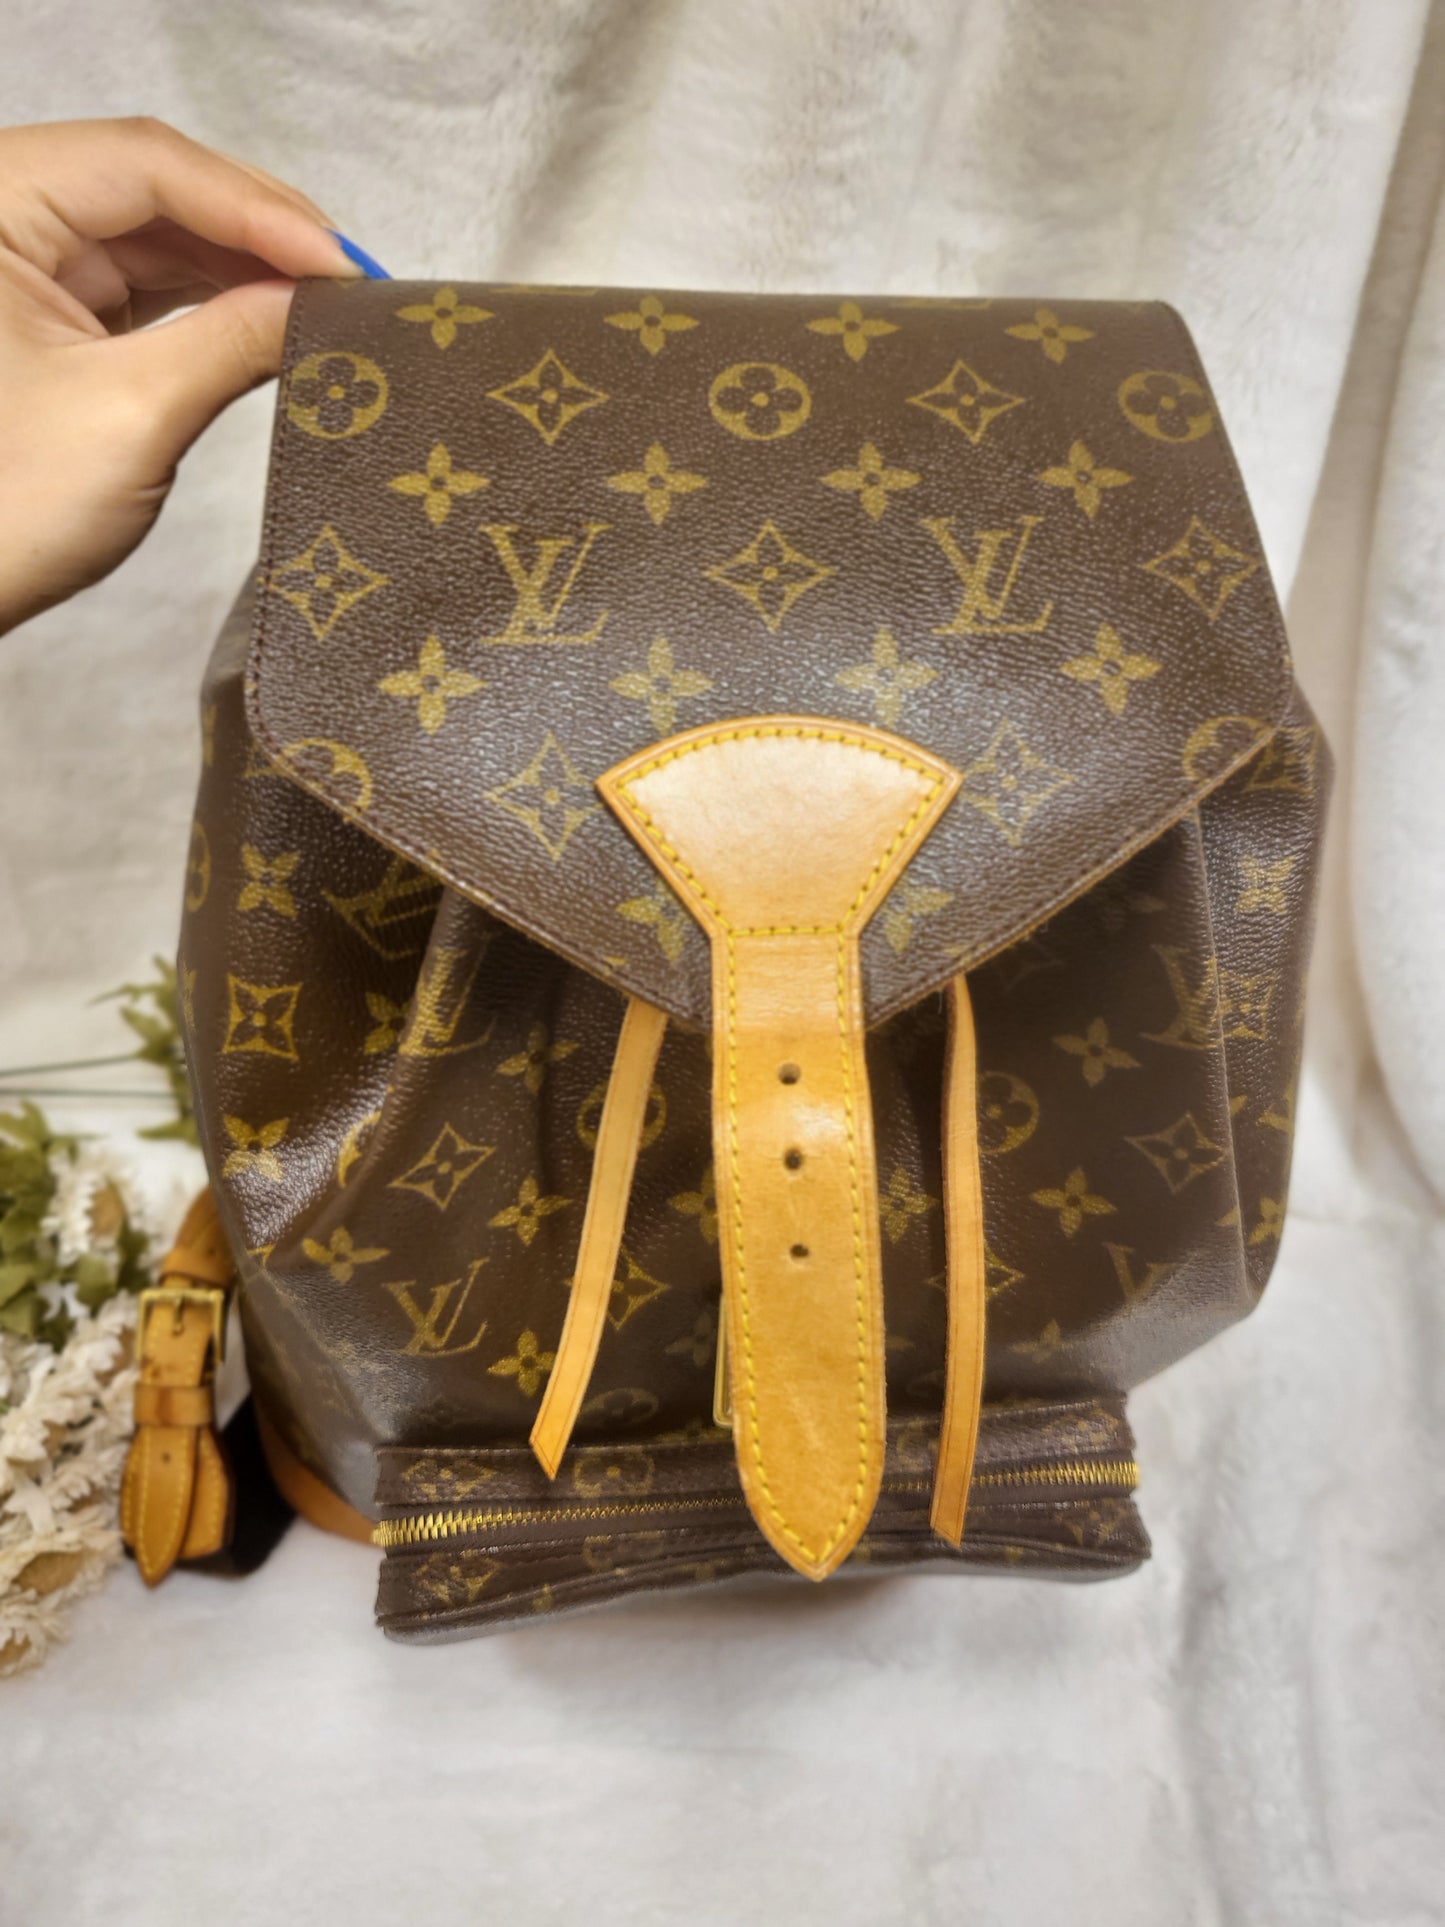 Authentic pre-owned Louis Vuitton Montsouris GM backpack